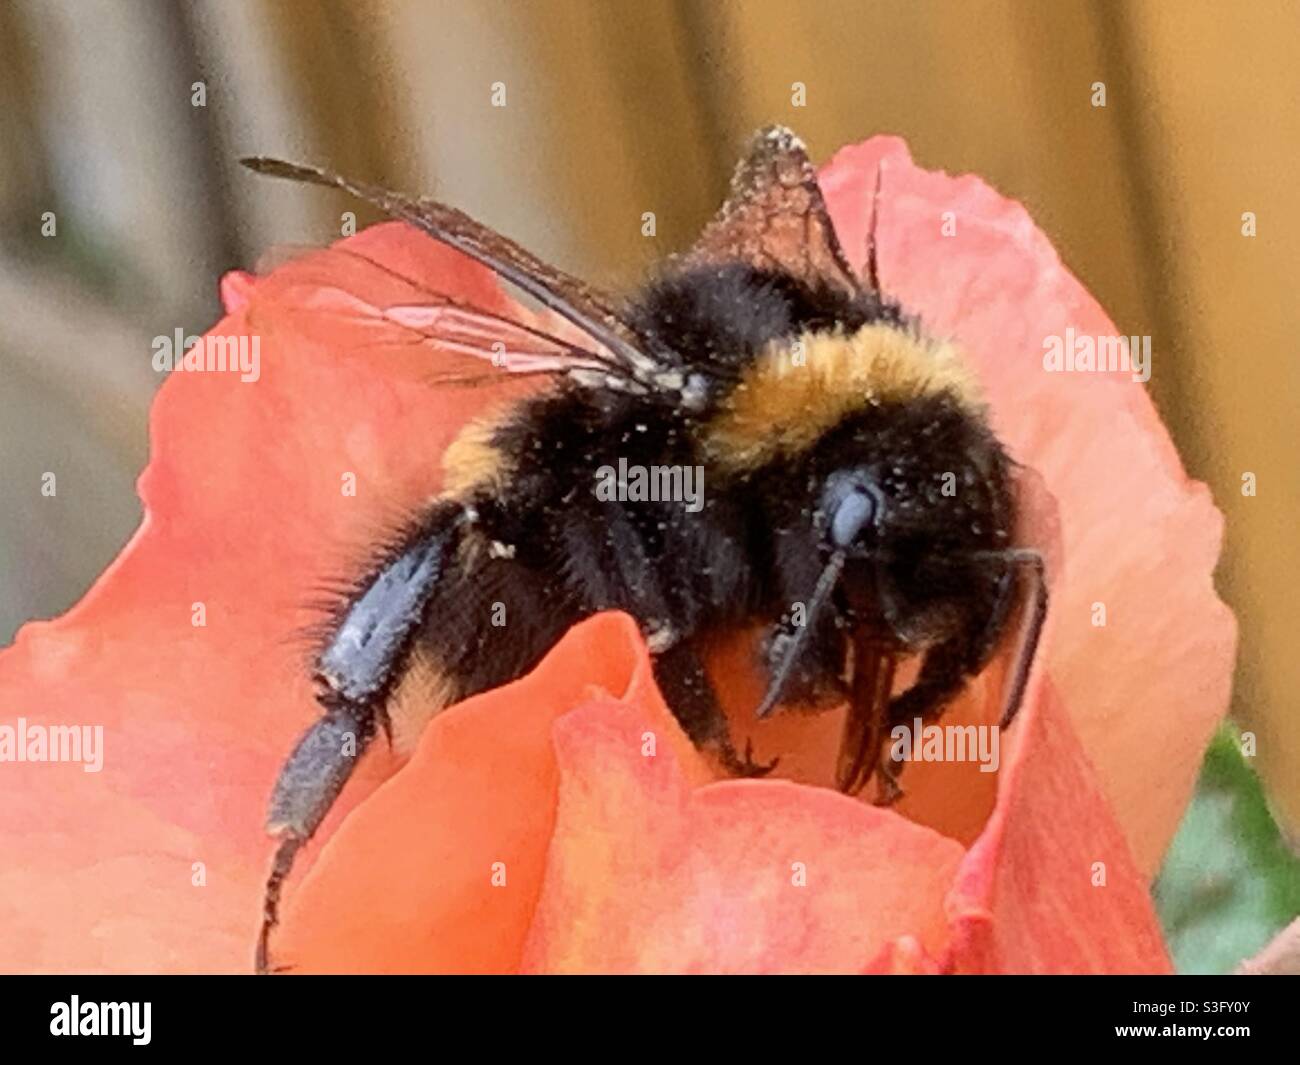 A beautiful British Bumblebee on a Rose flower. Summer 2021. Stock Photo